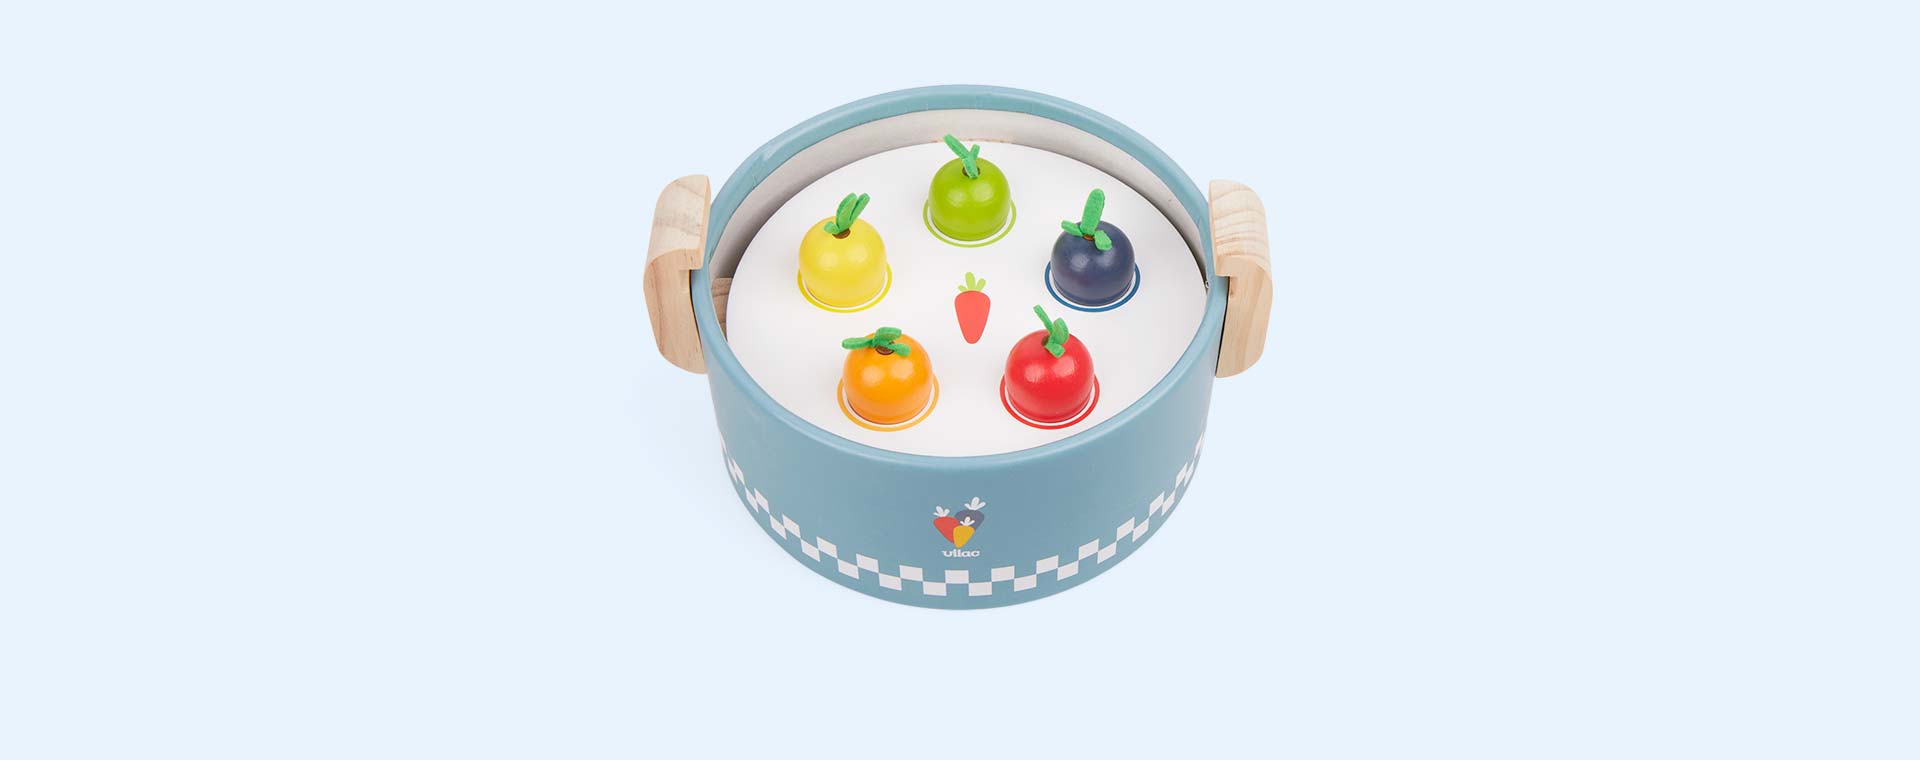 Multi Vilac Early Learning Cooking Pot